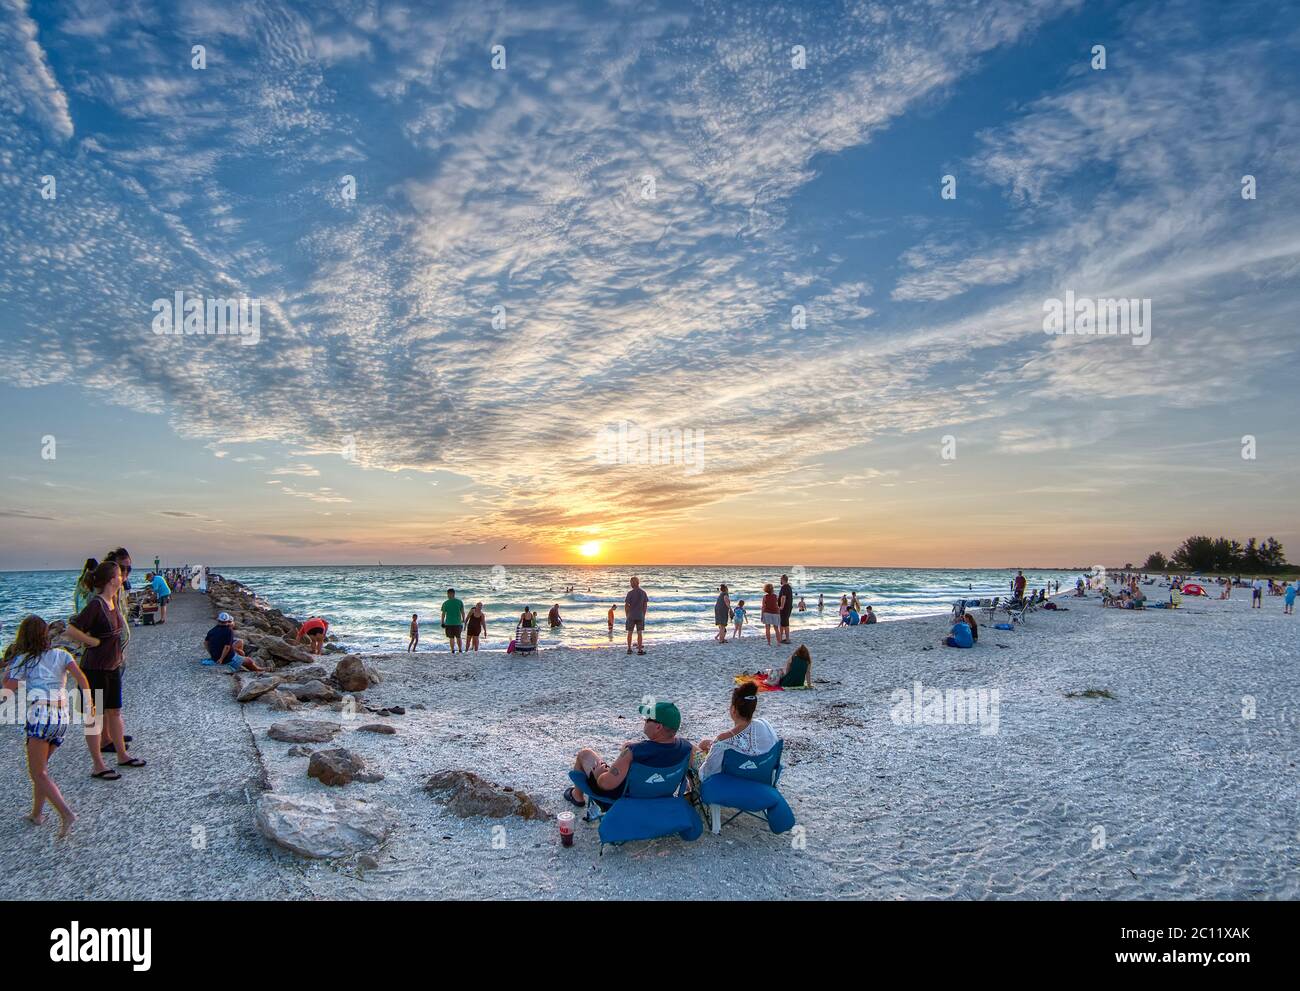 Sunset at North Jetty Beach on the Gulf of Mexico in Nokomis Florida United States Stock Photo